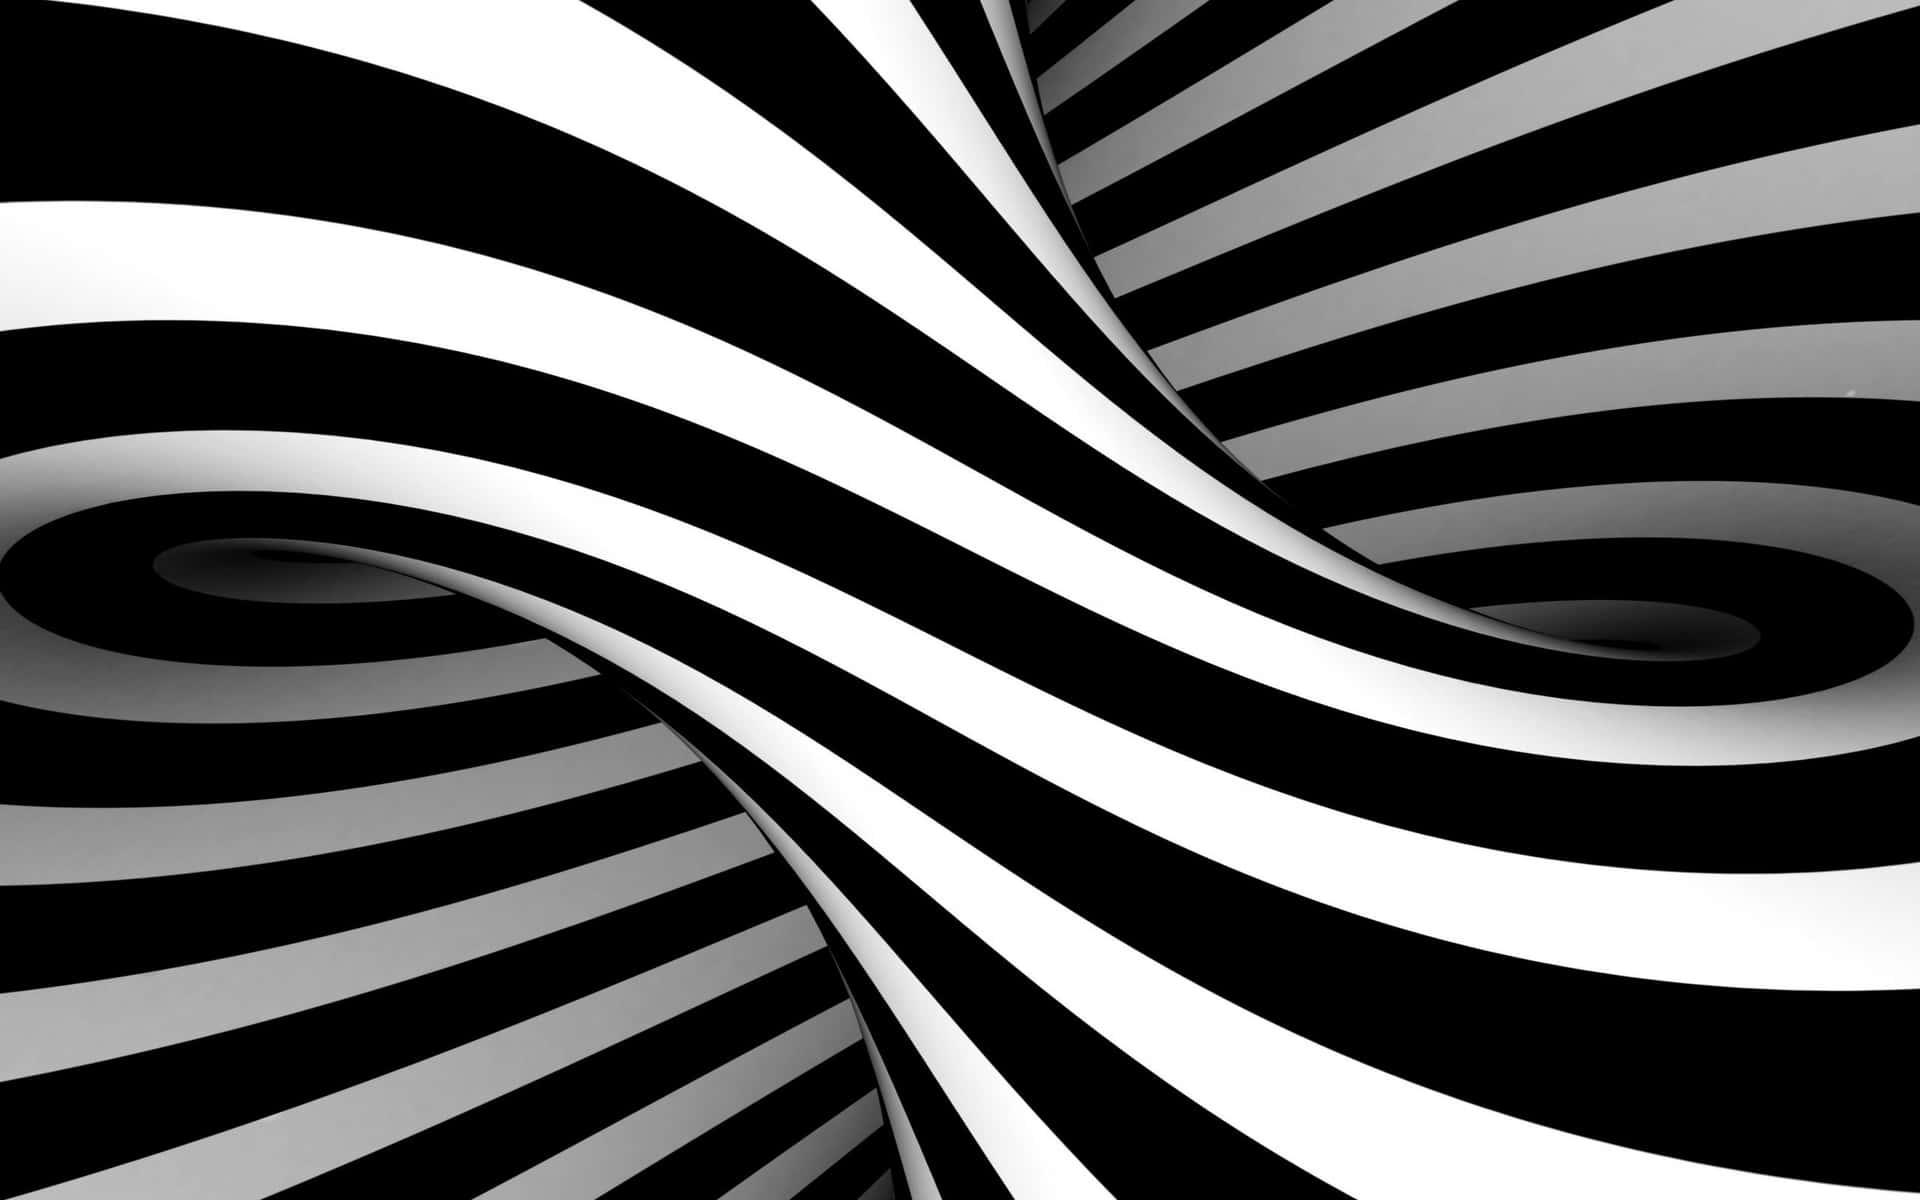 100+] Black And White Stripes Wallpapers 